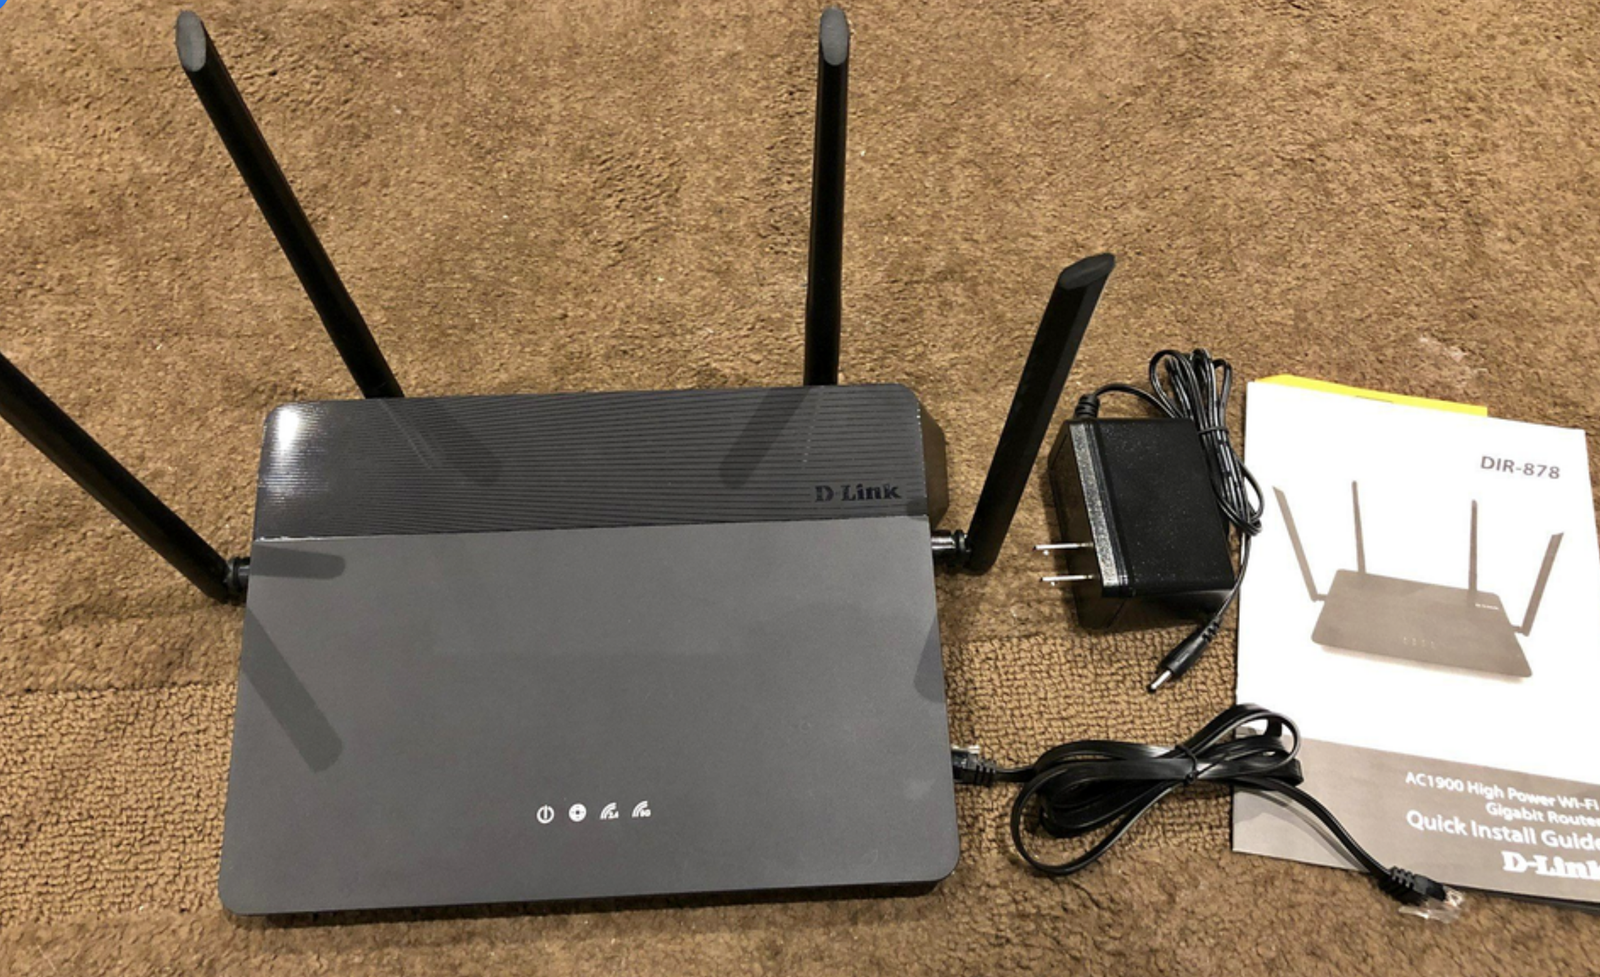 Fix PS4 That Keeps Disconnecting From WiFi by restarting router